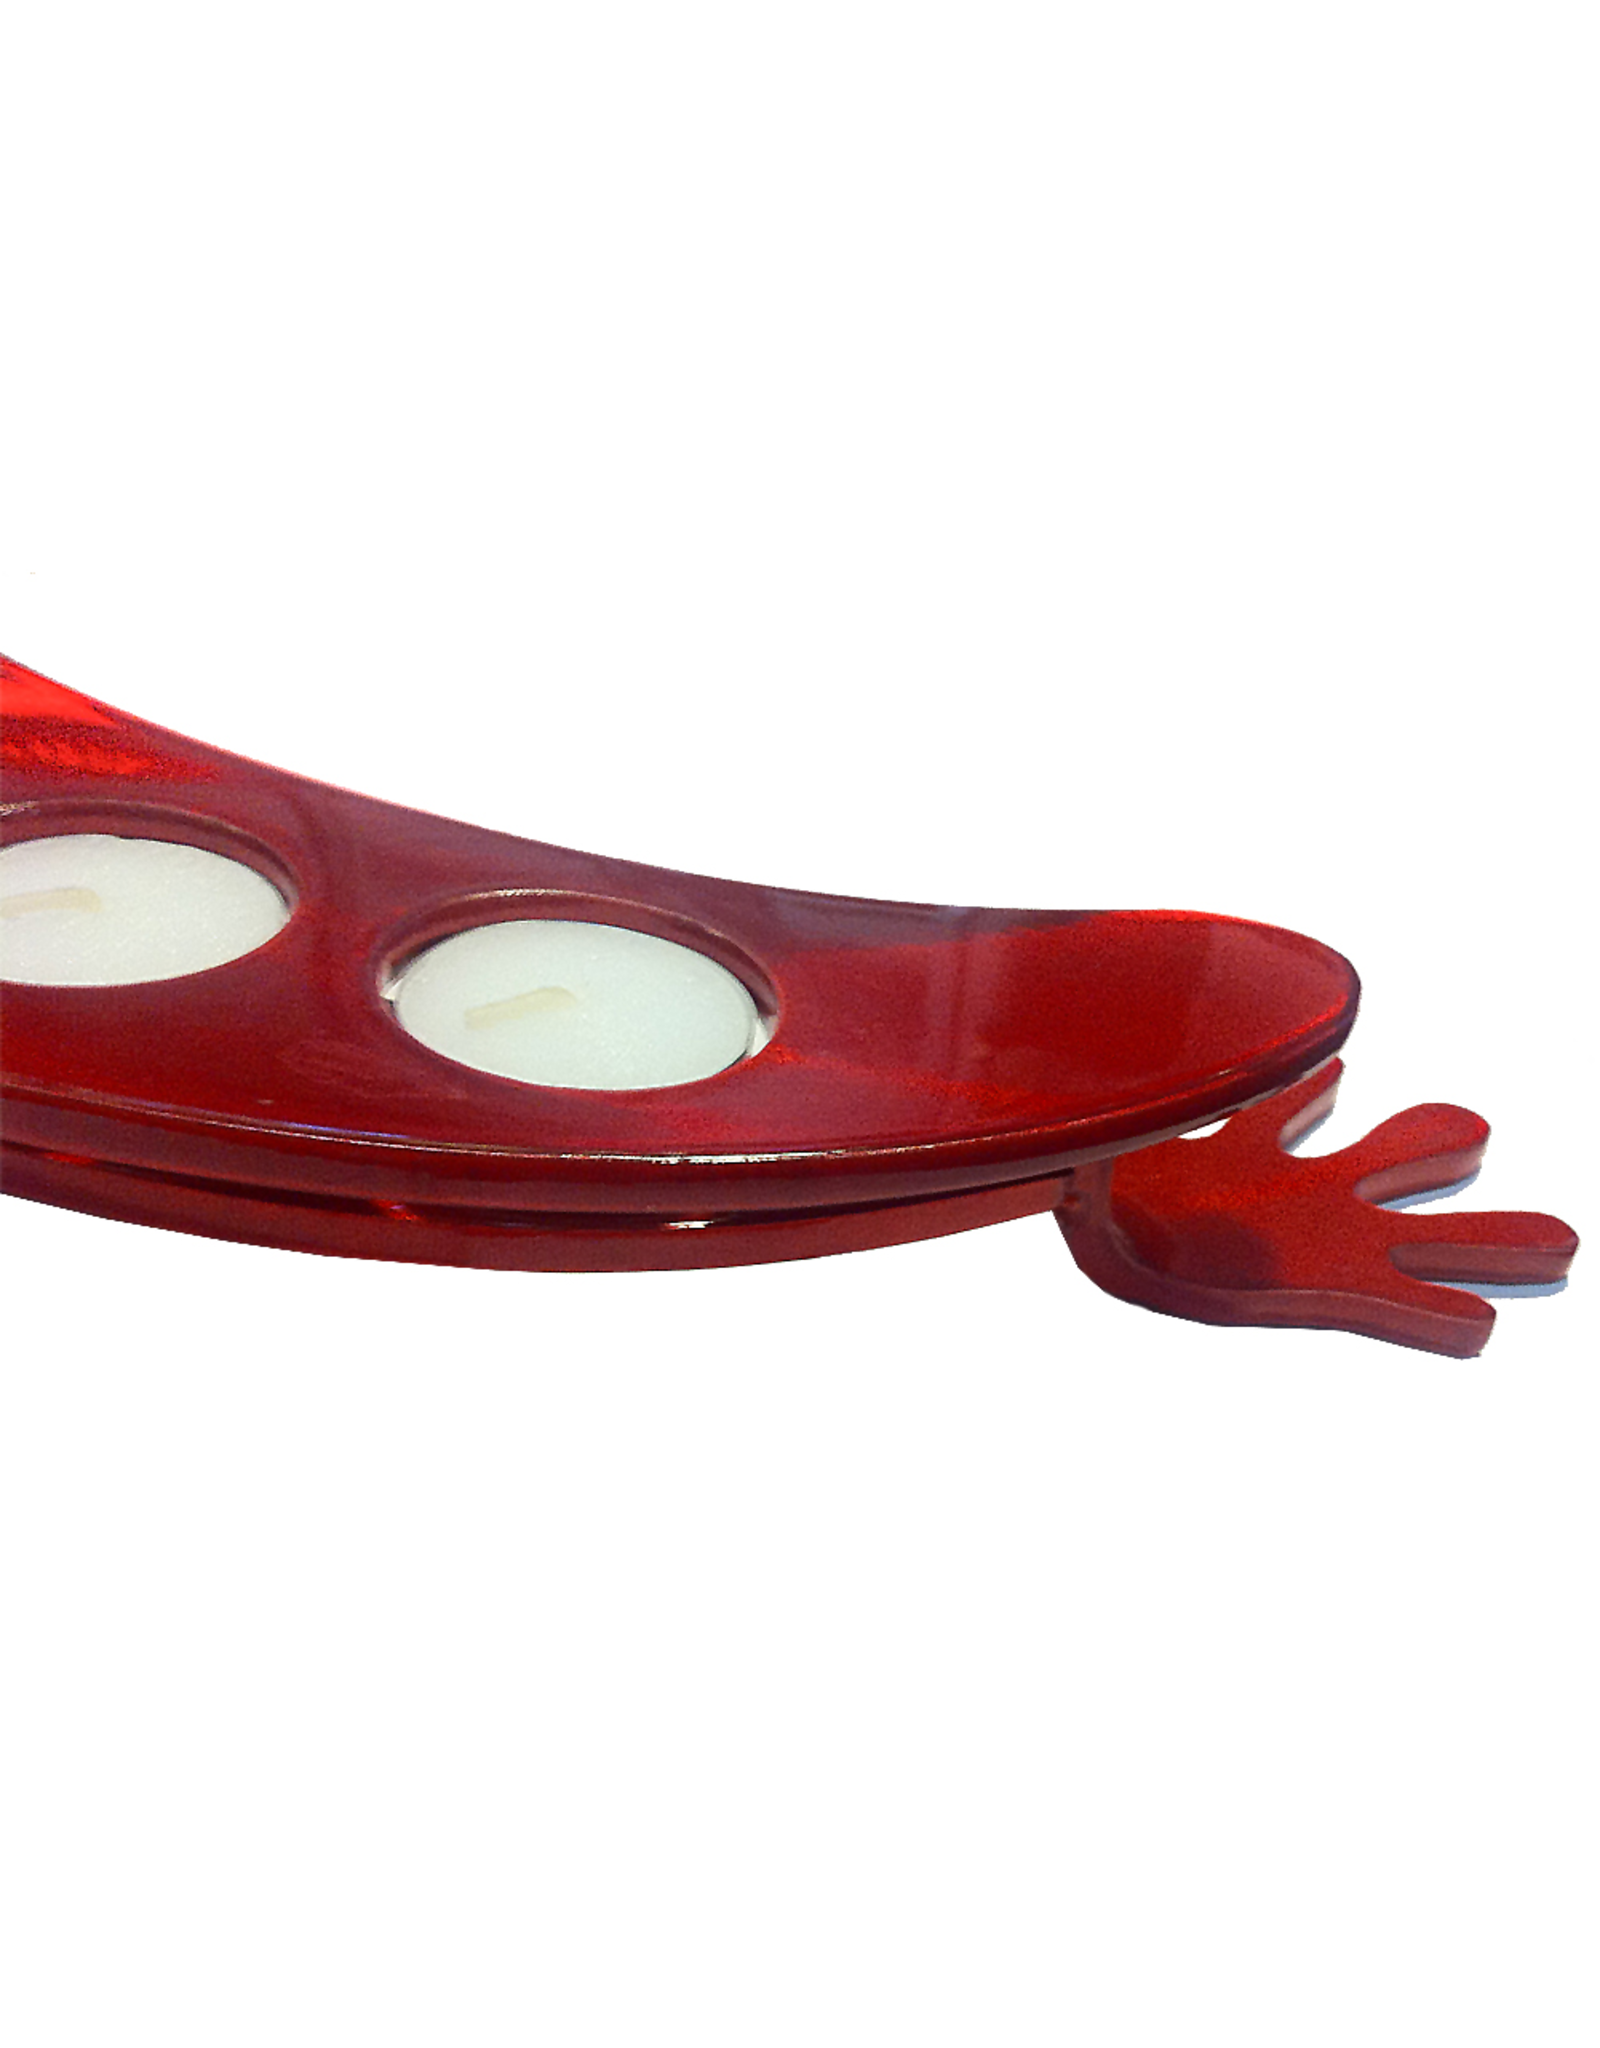 Rockledge Design Studios Red Curved Handy Tea Light Candle Tray